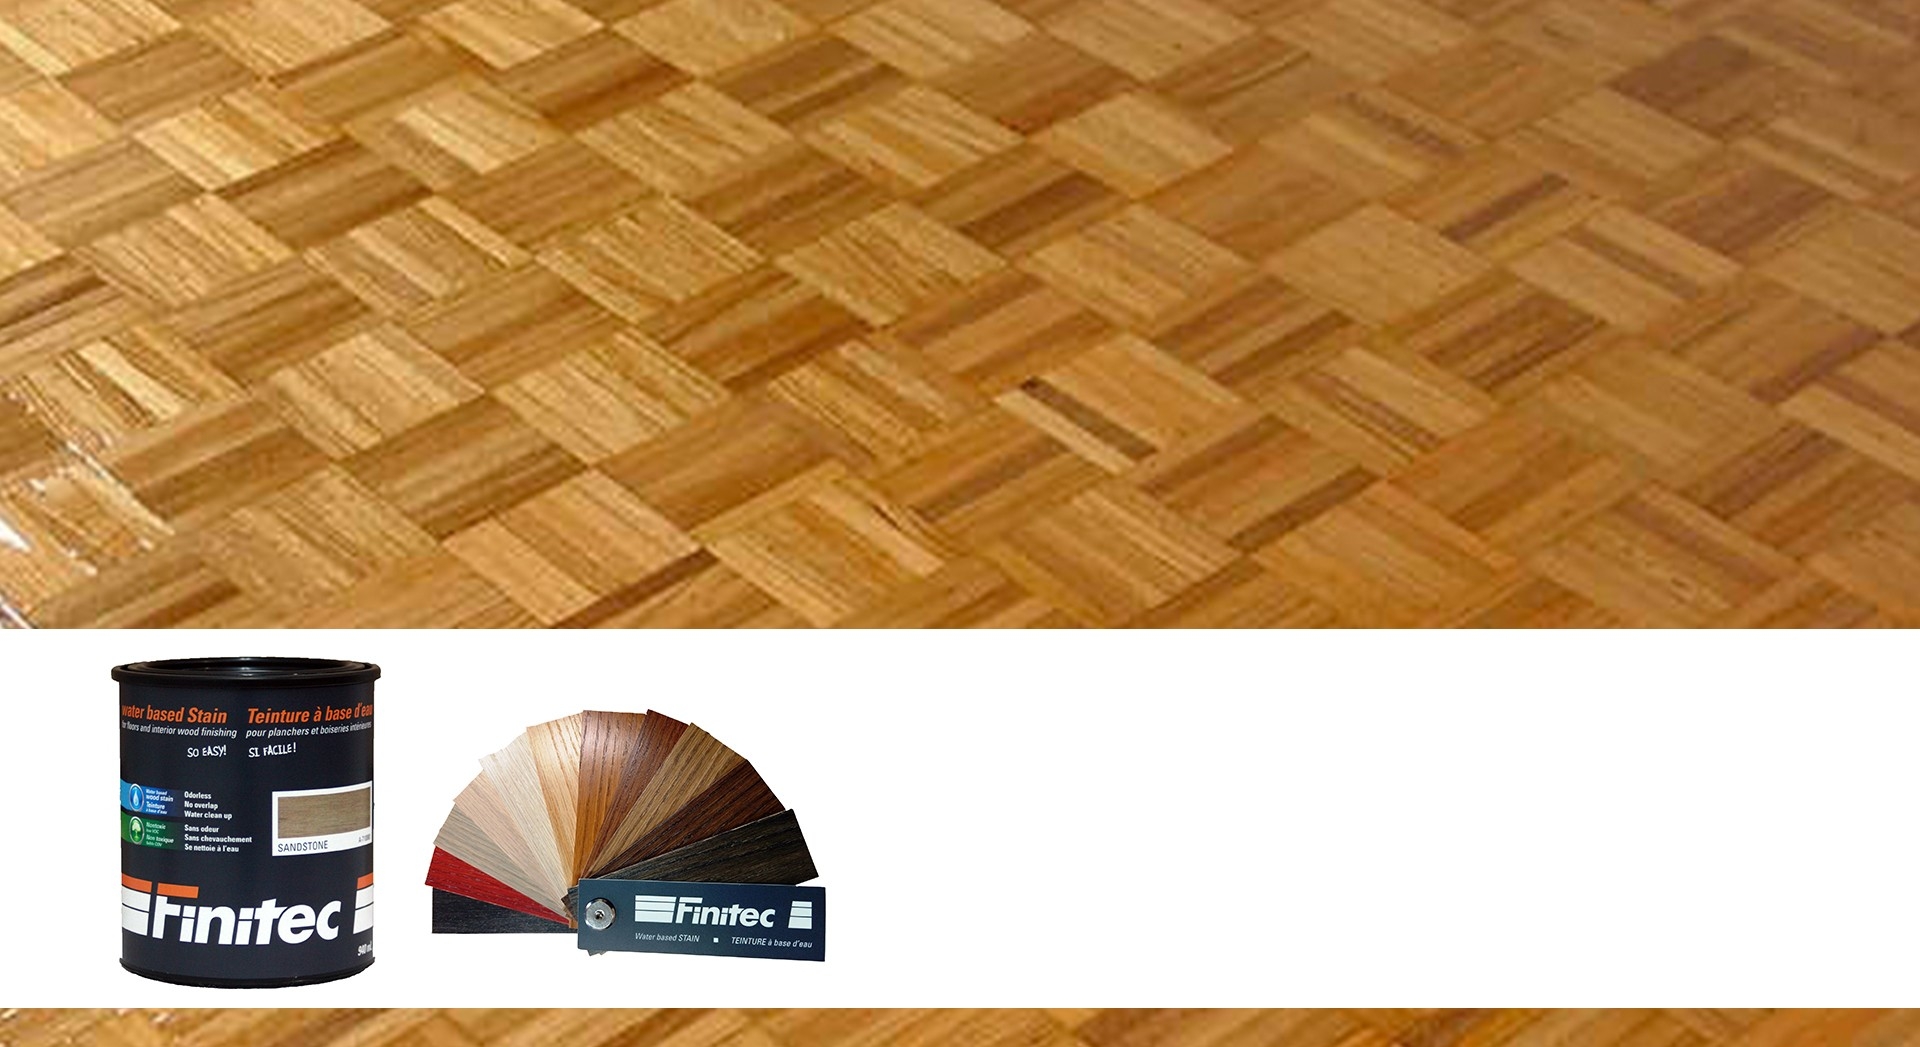 Tired of your parquet flooring? Give it a brand new look